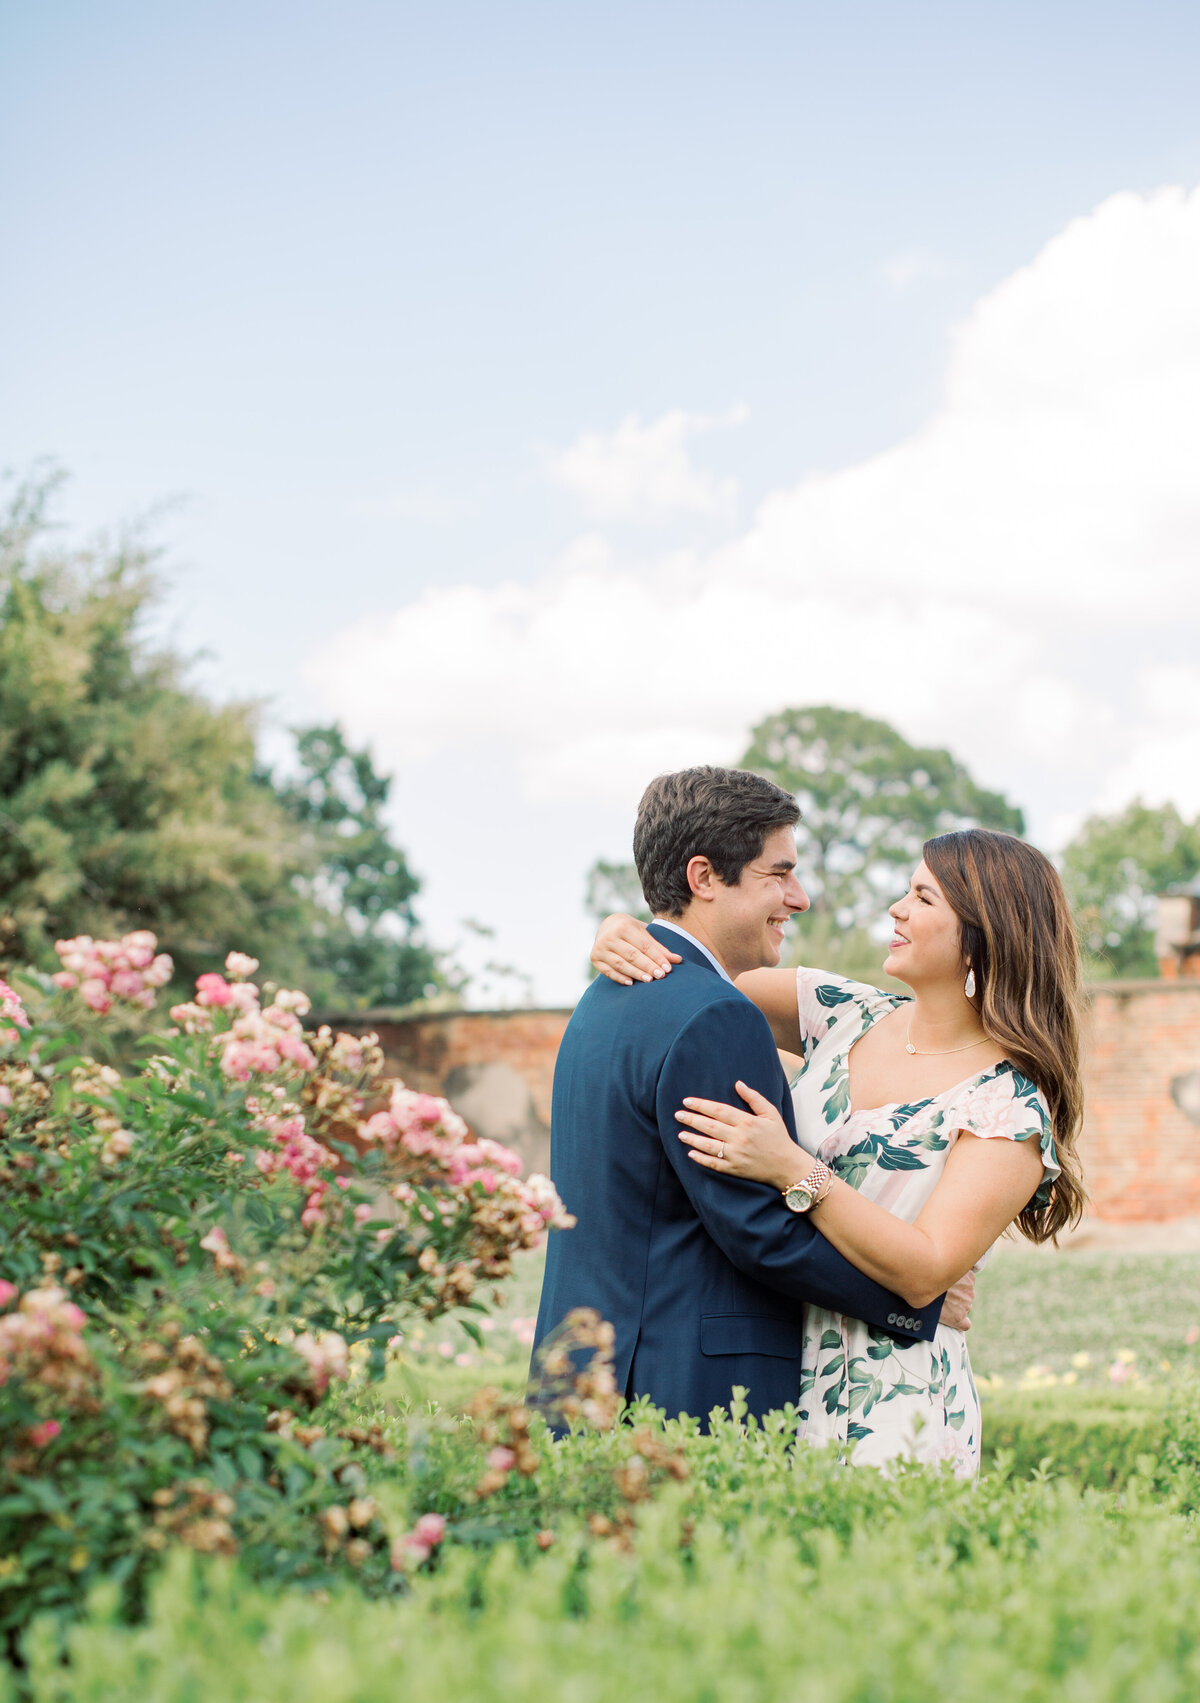 Arsenal Park Engagements in Baton Rouge-24